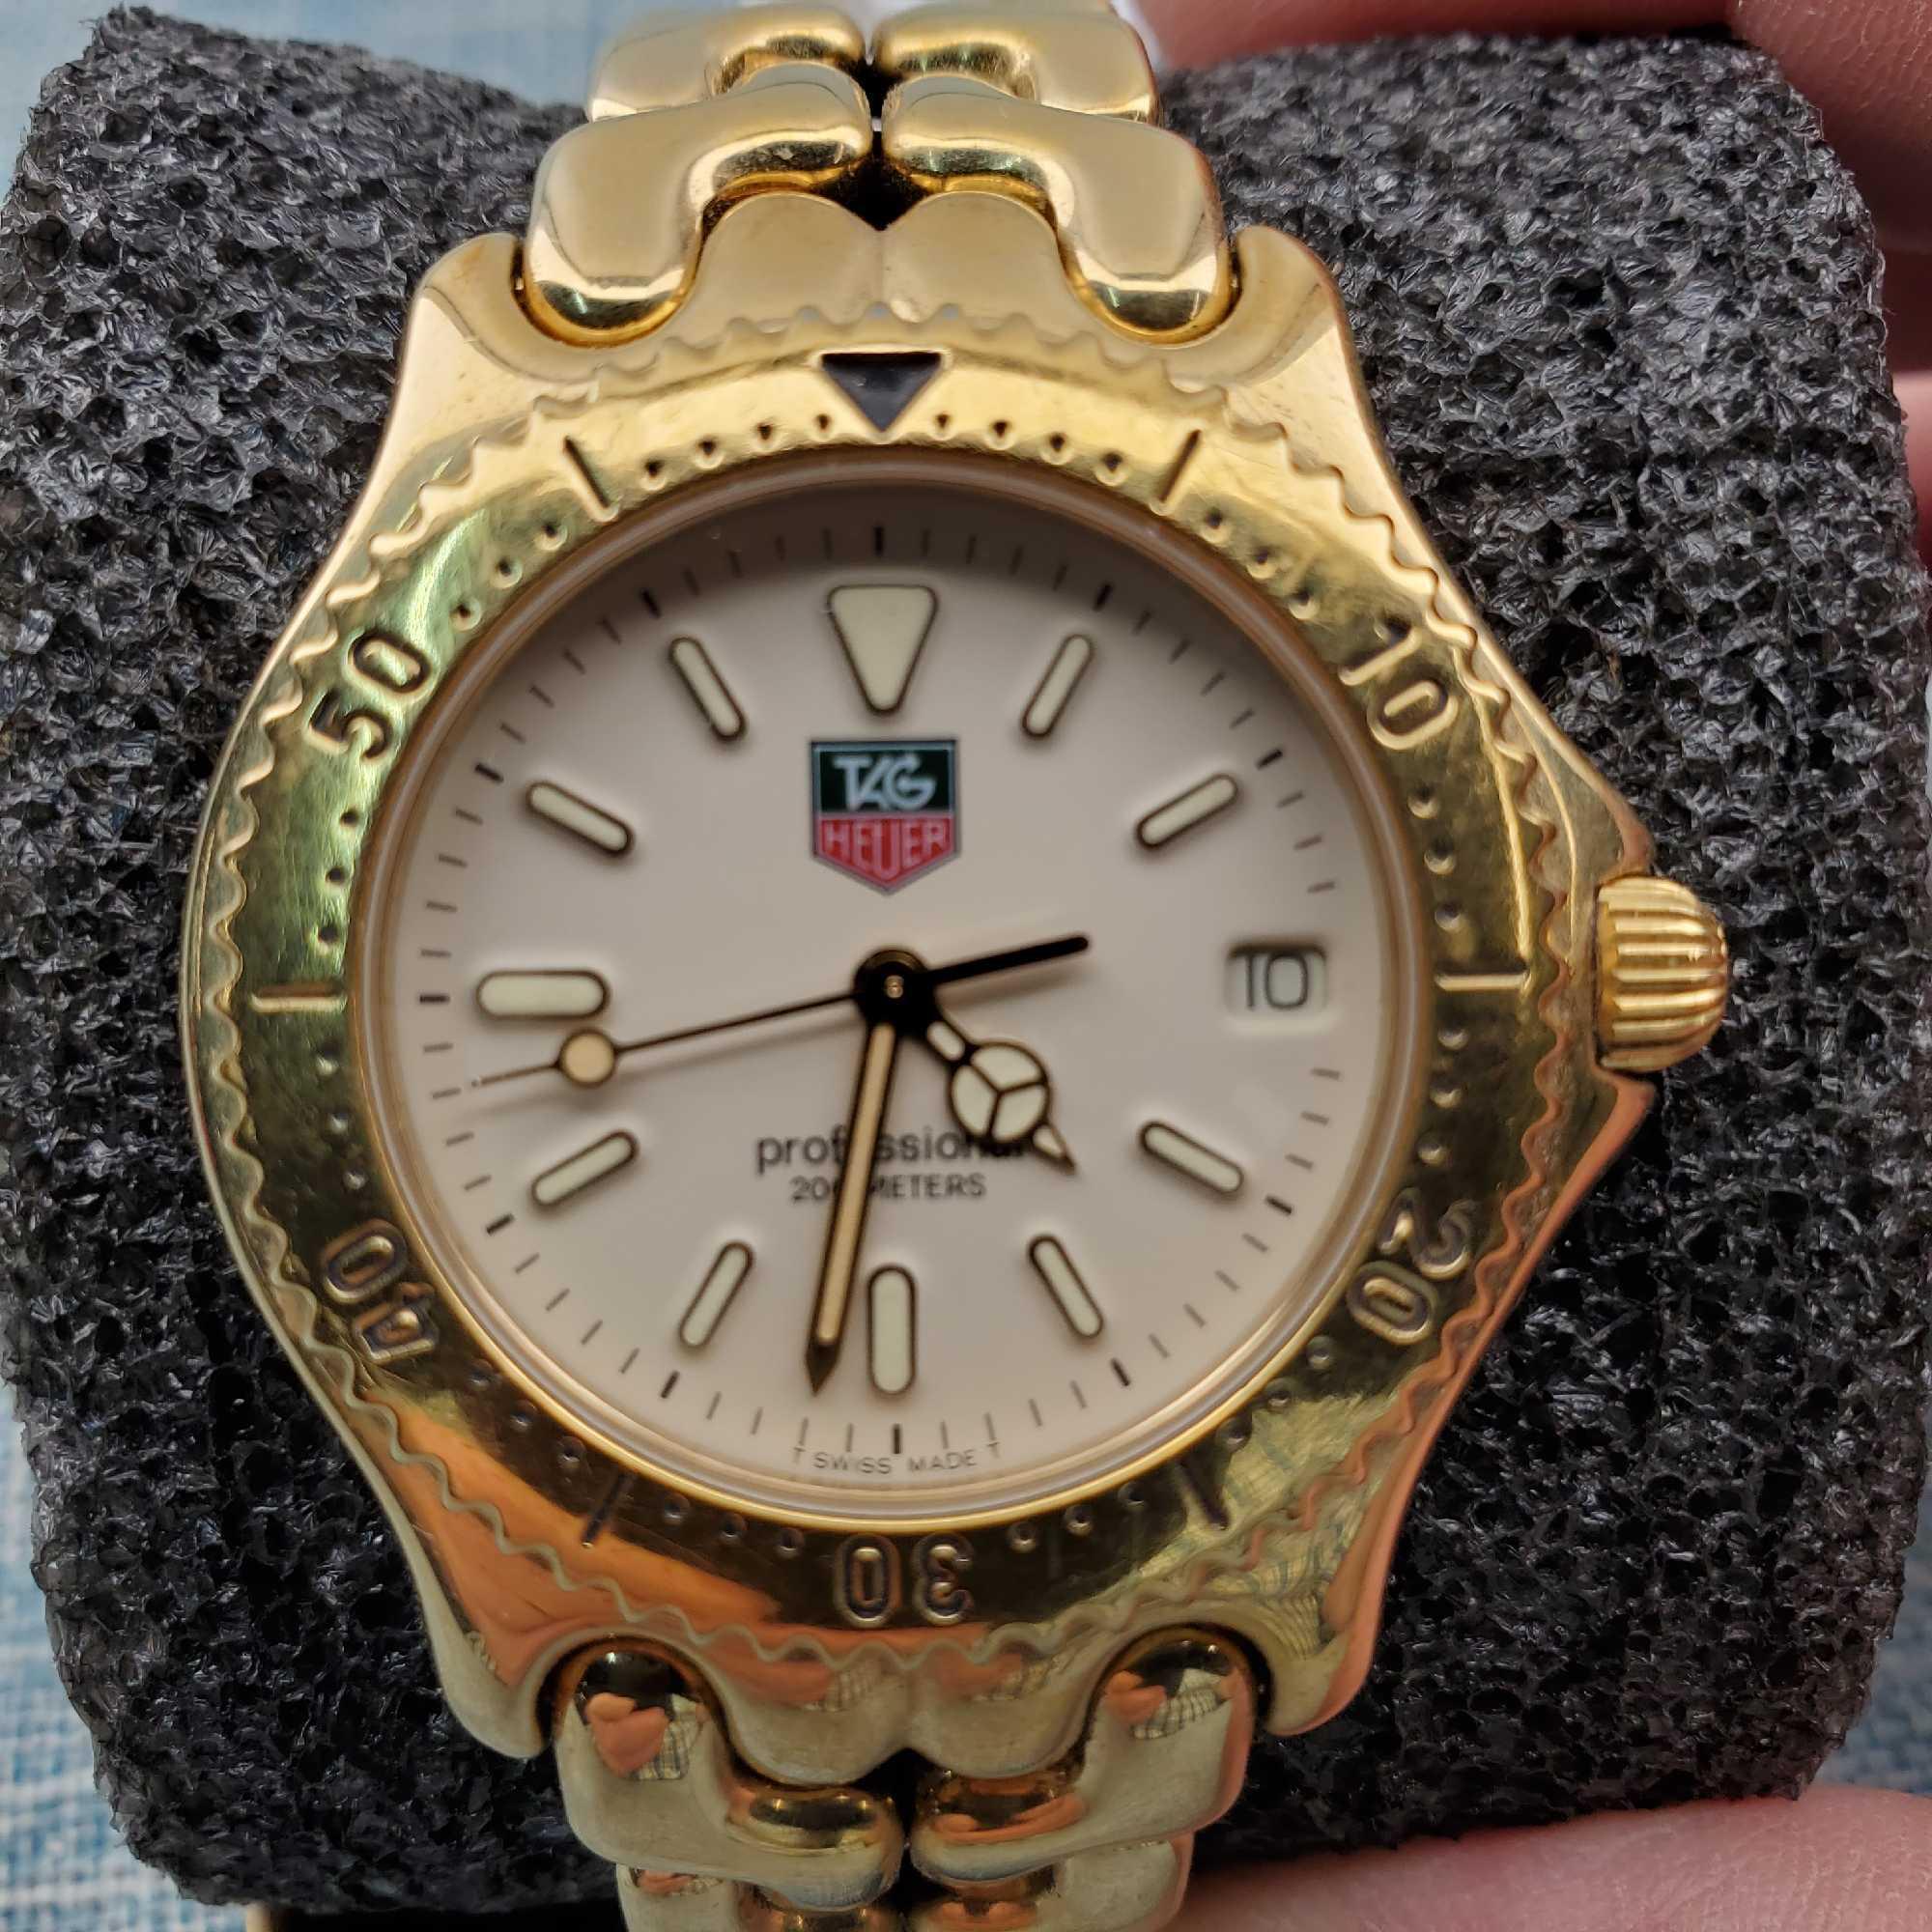 Vintage Gold Plate and Stainless Steel TAG Heuer Professional 200